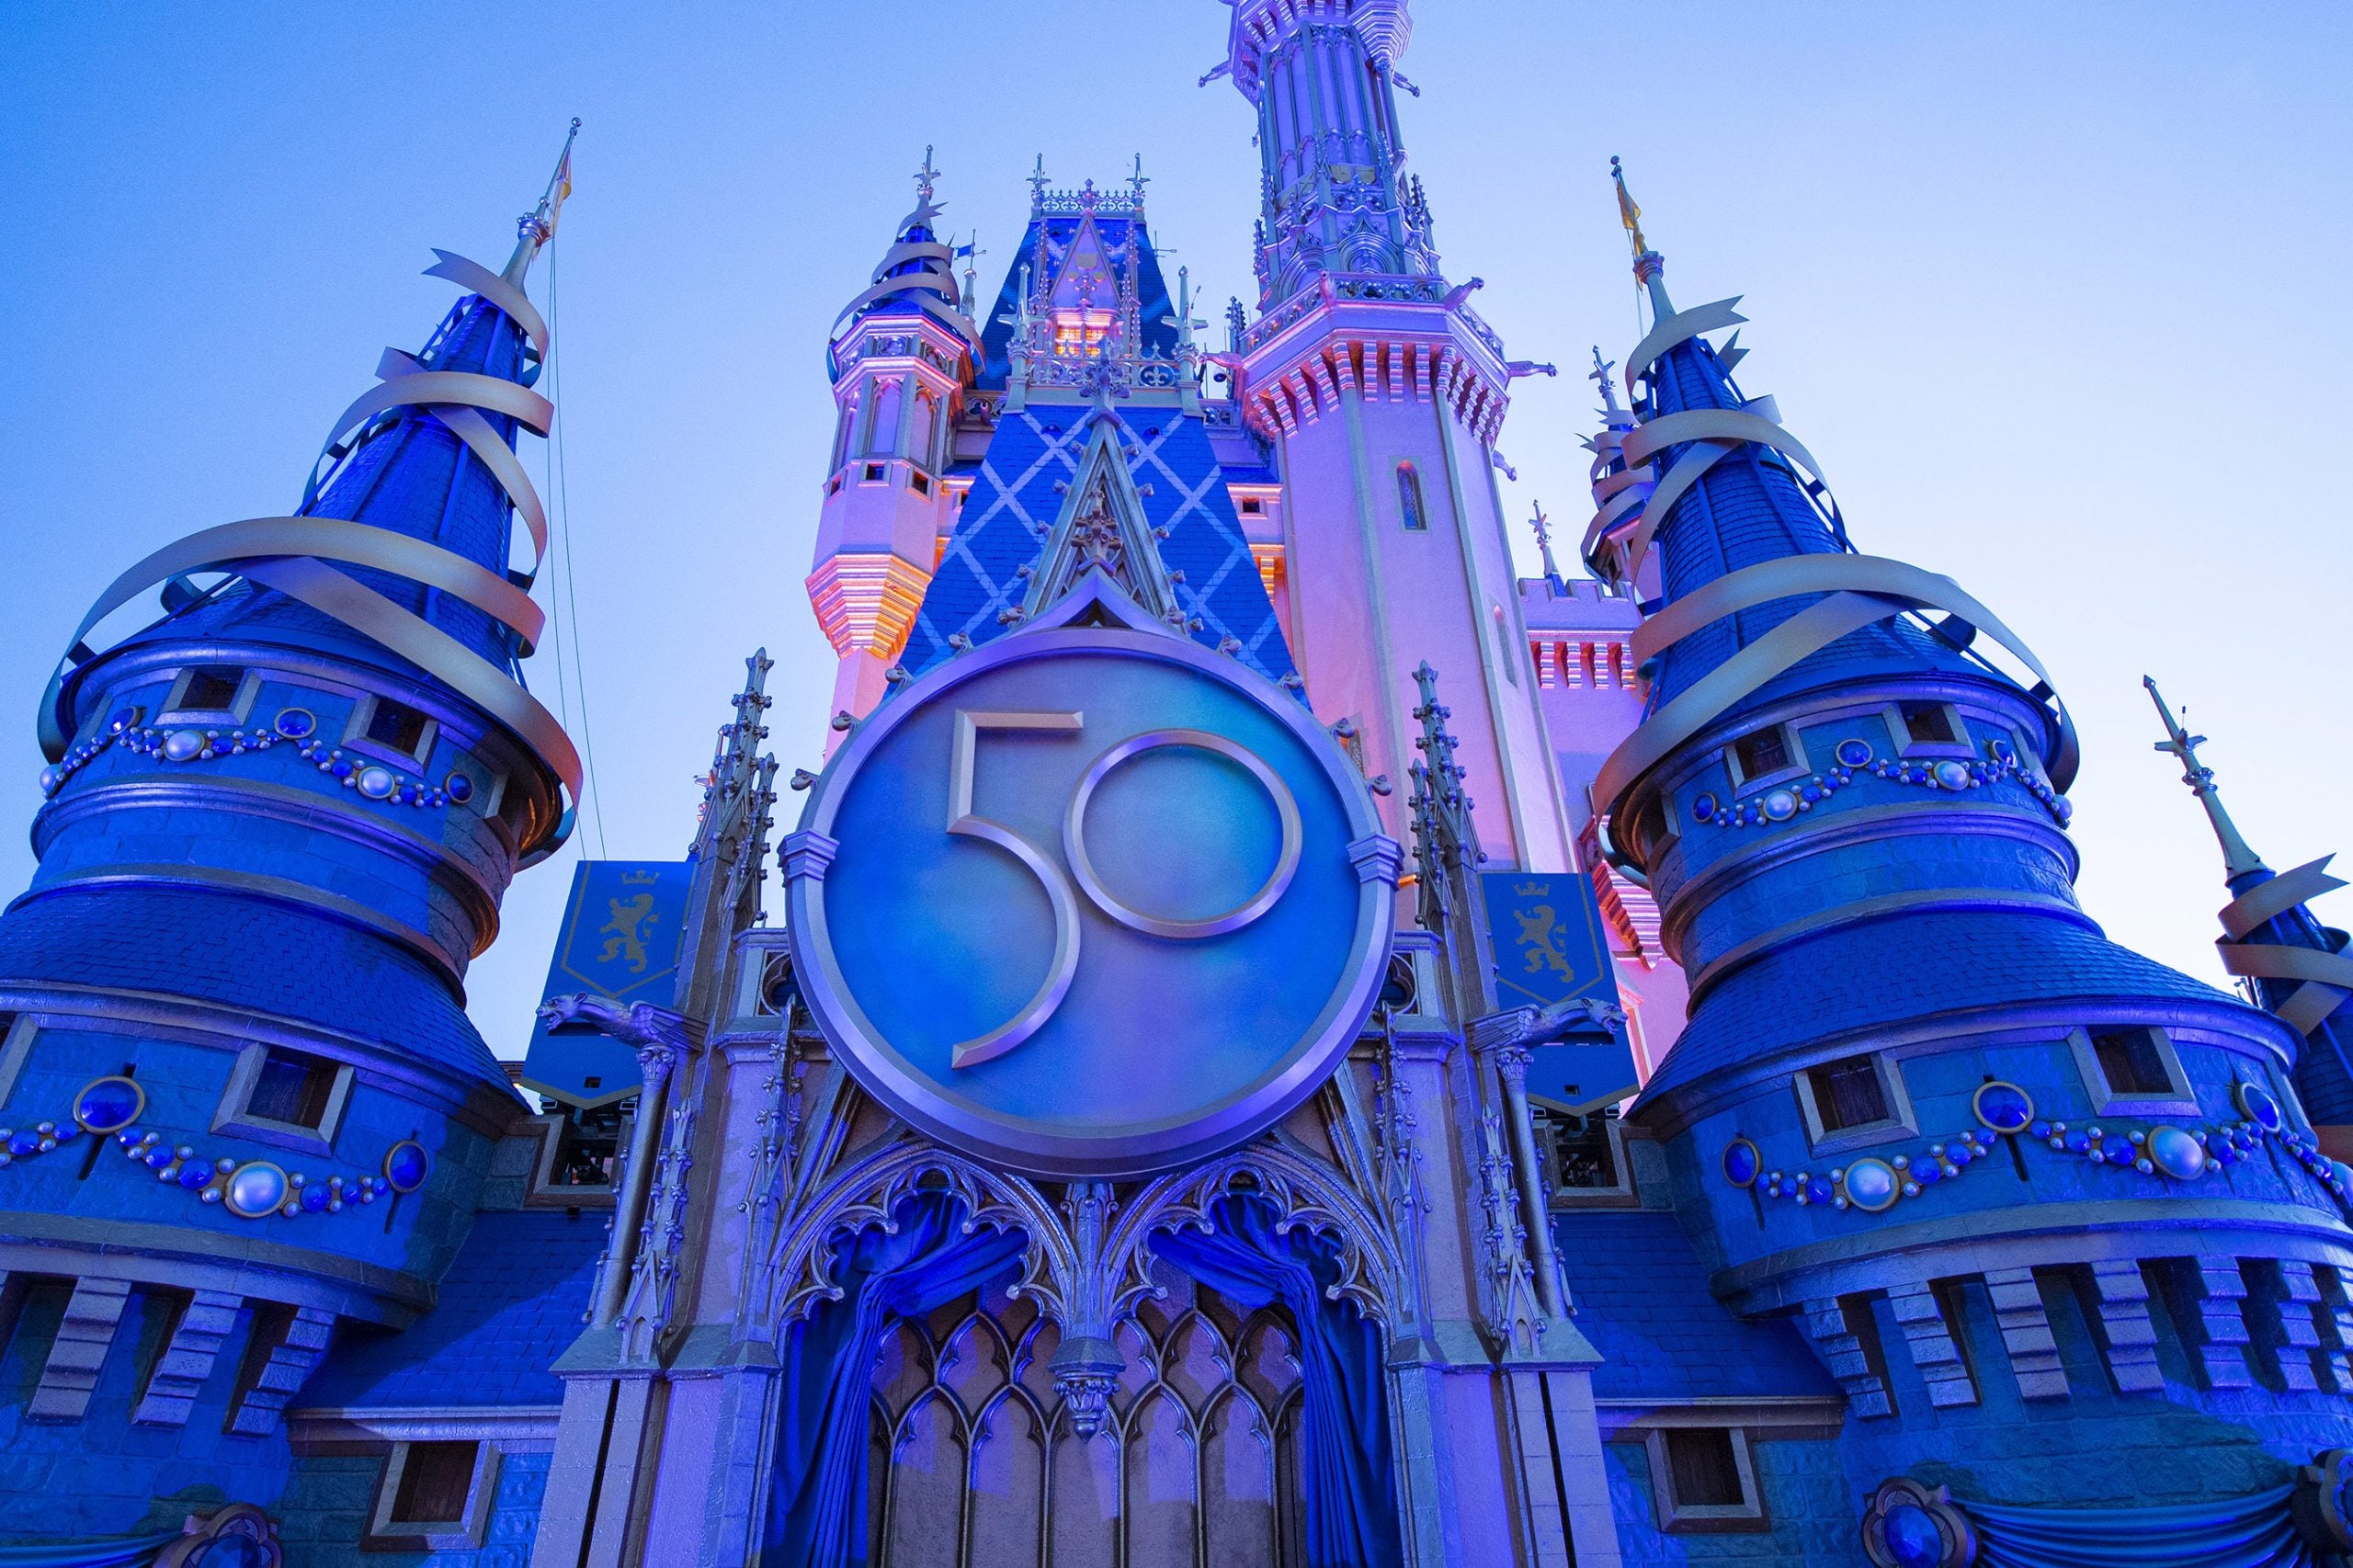 All Of The Fun New Ways To Enjoy A Family Visit To Disney World’s 50th Anniversary Celebration